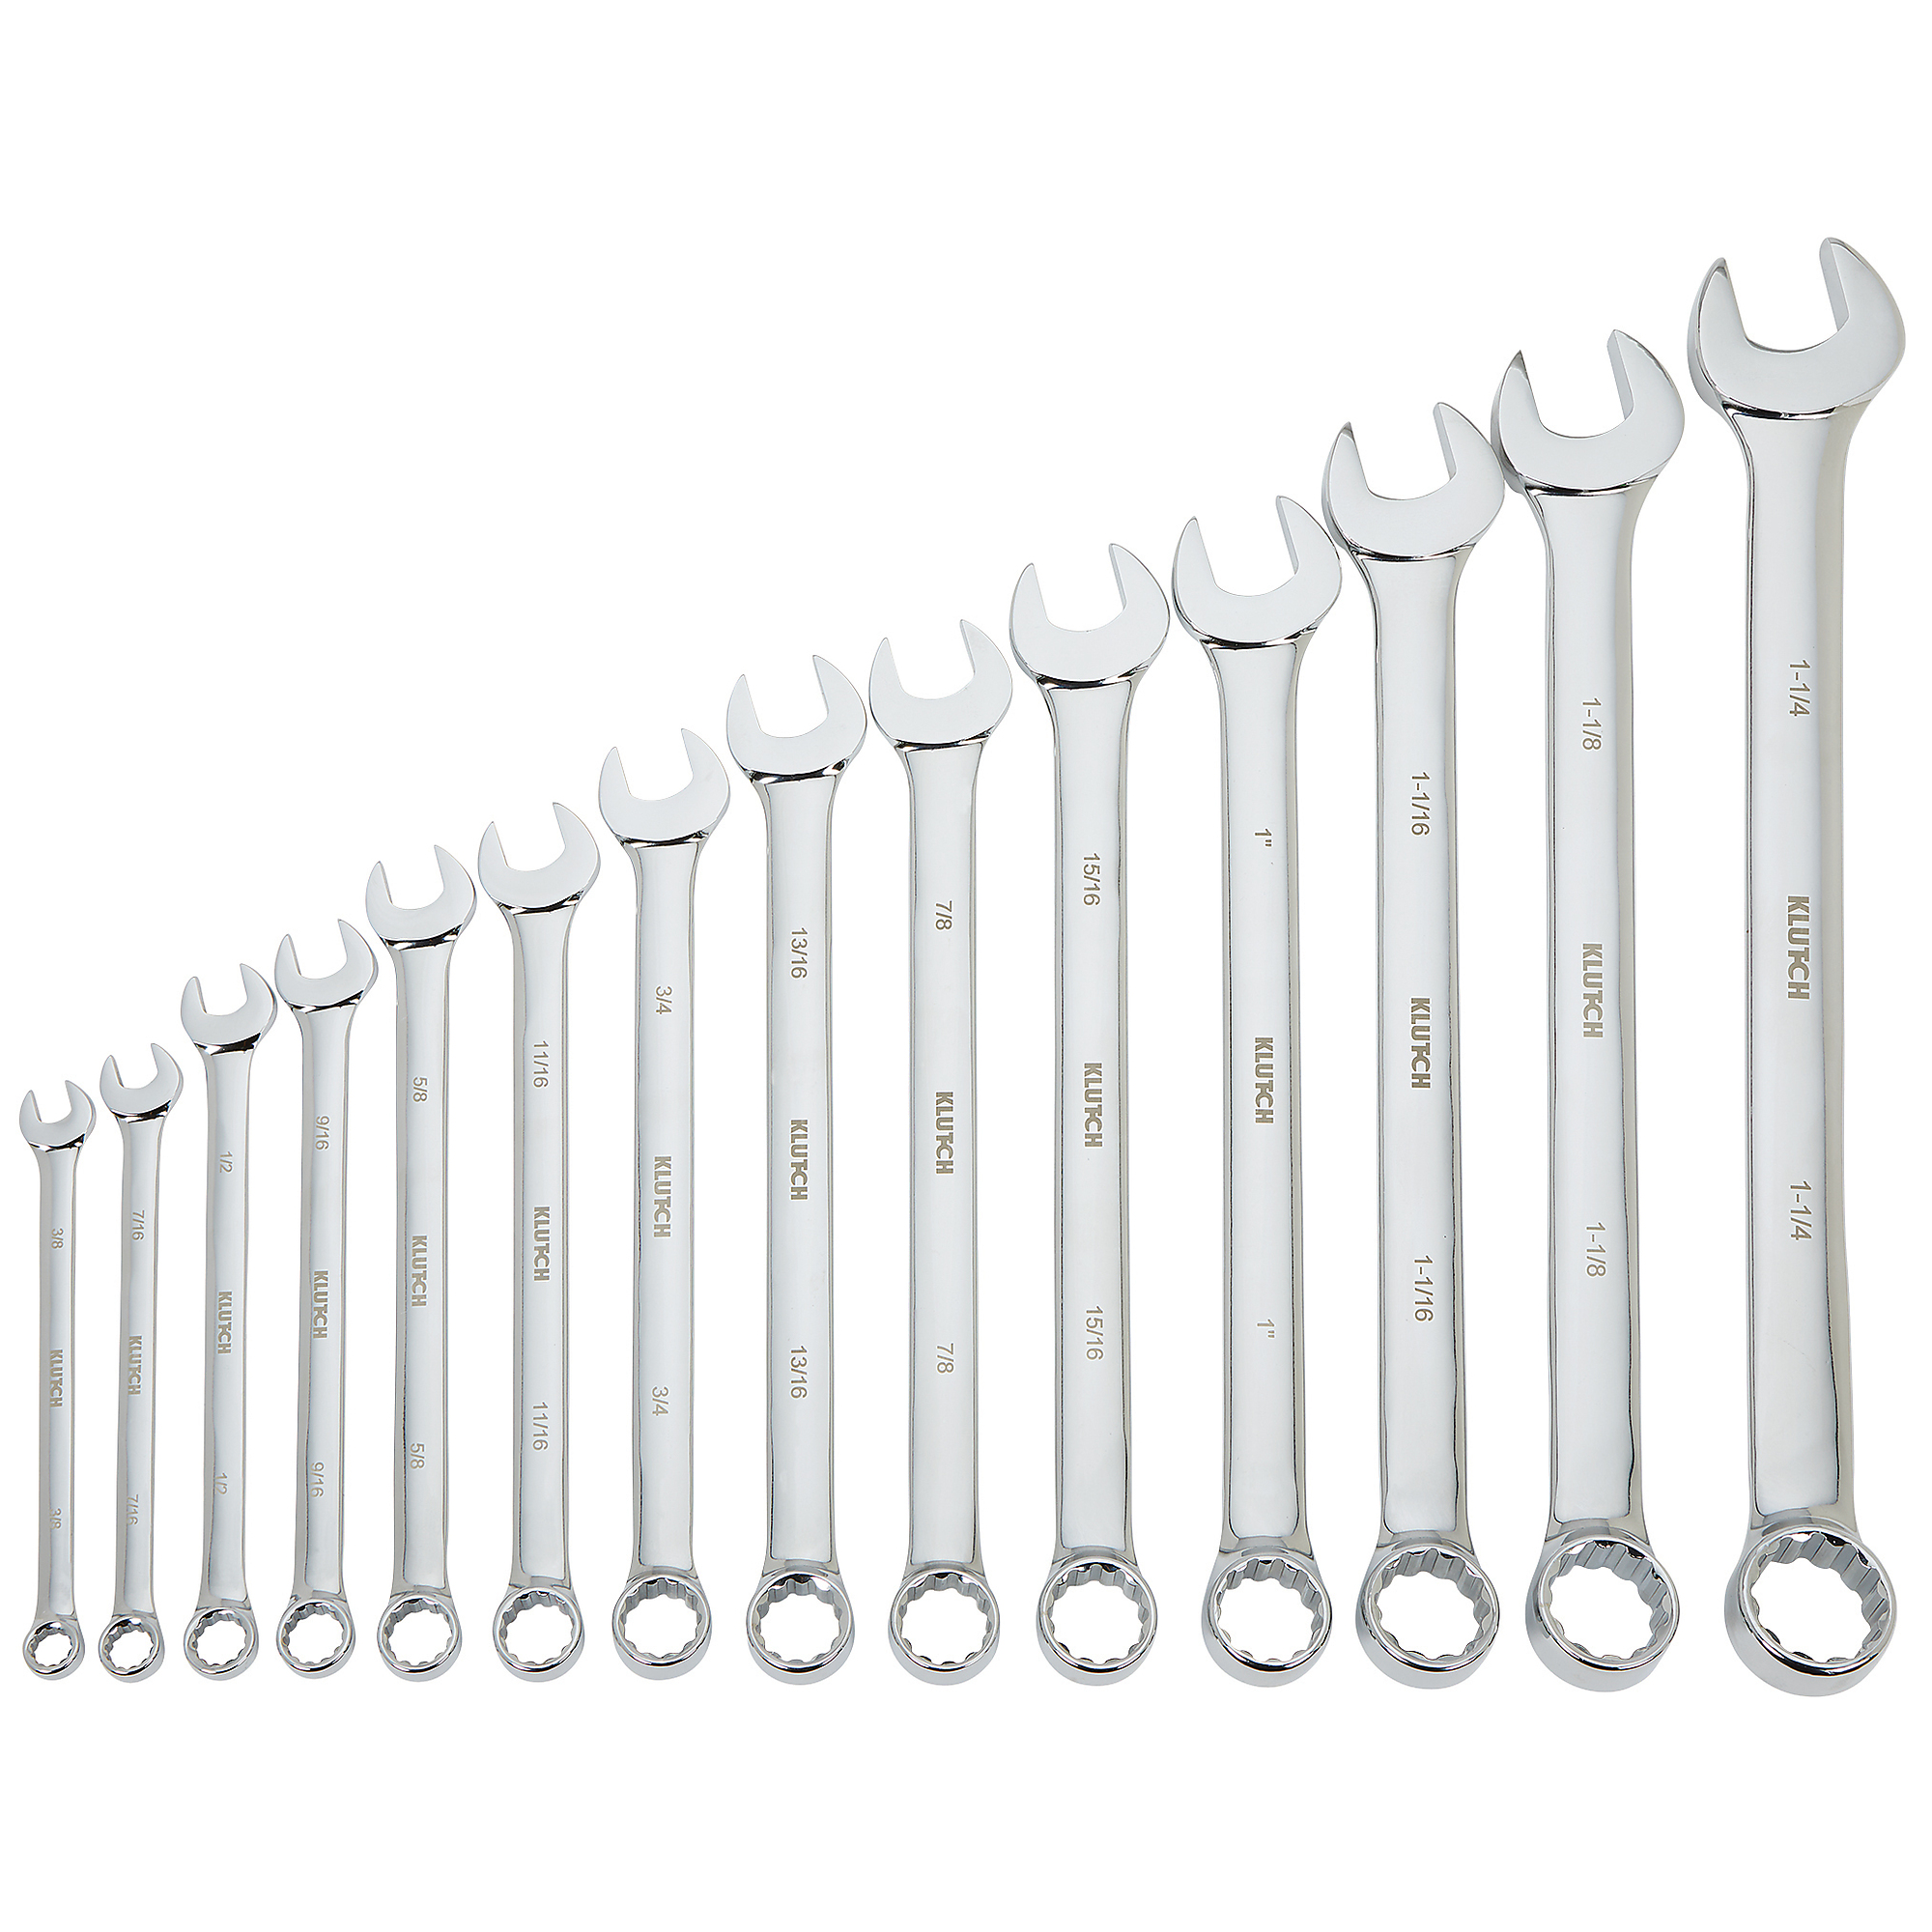 Klutch 14-Piece Extra-Long SAE Combination Wrench Set, Model 34691 A